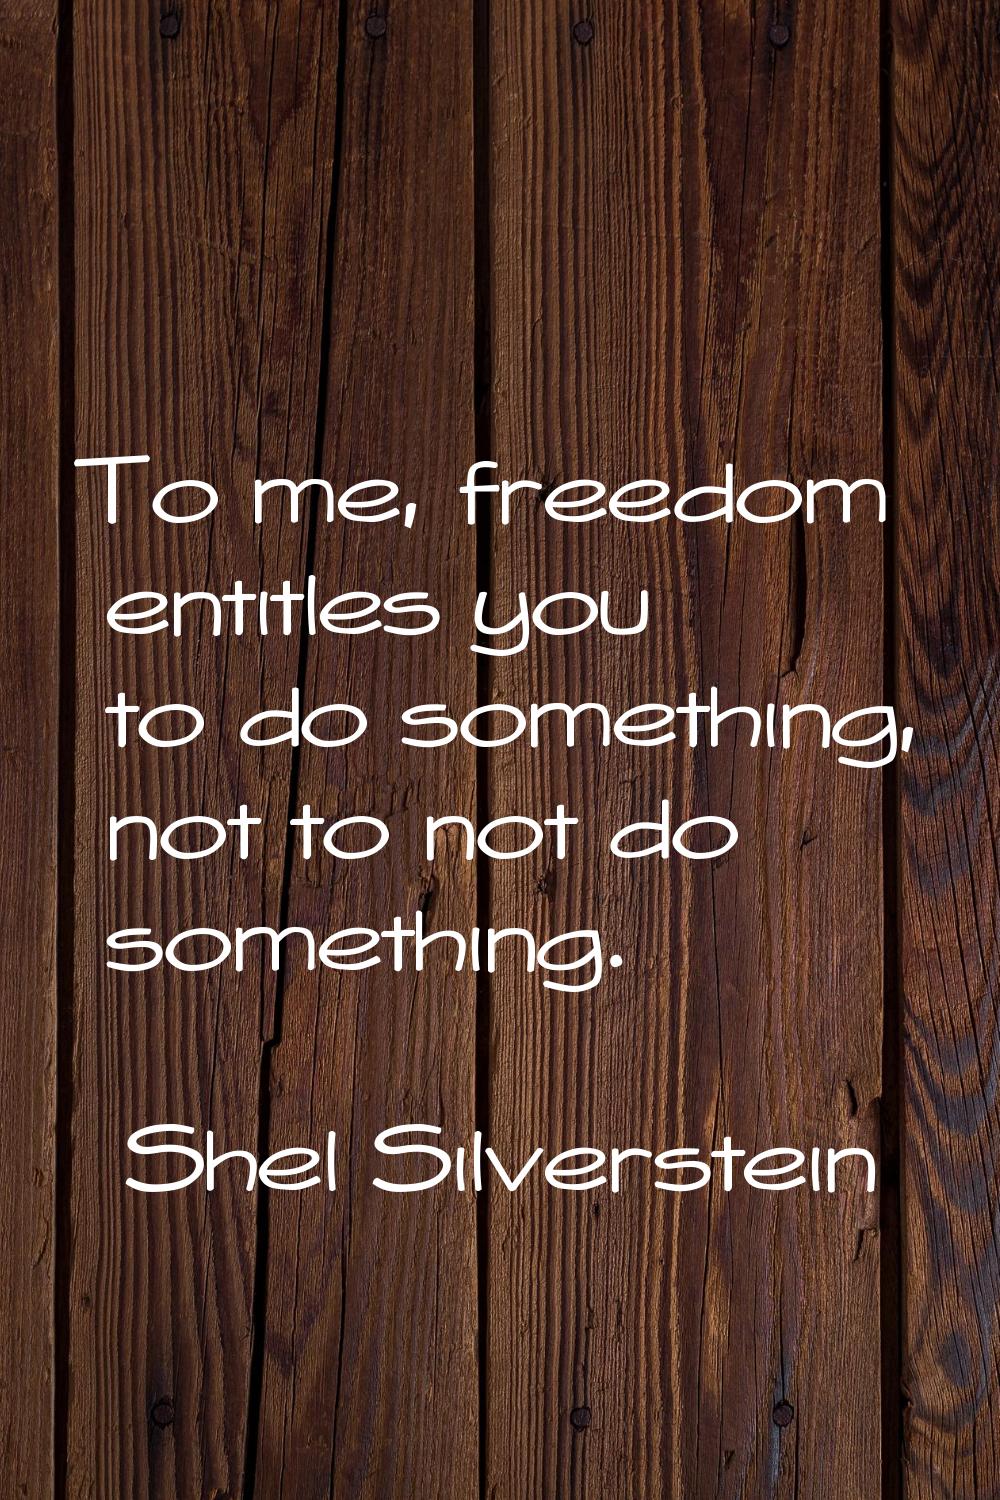 To me, freedom entitles you to do something, not to not do something.